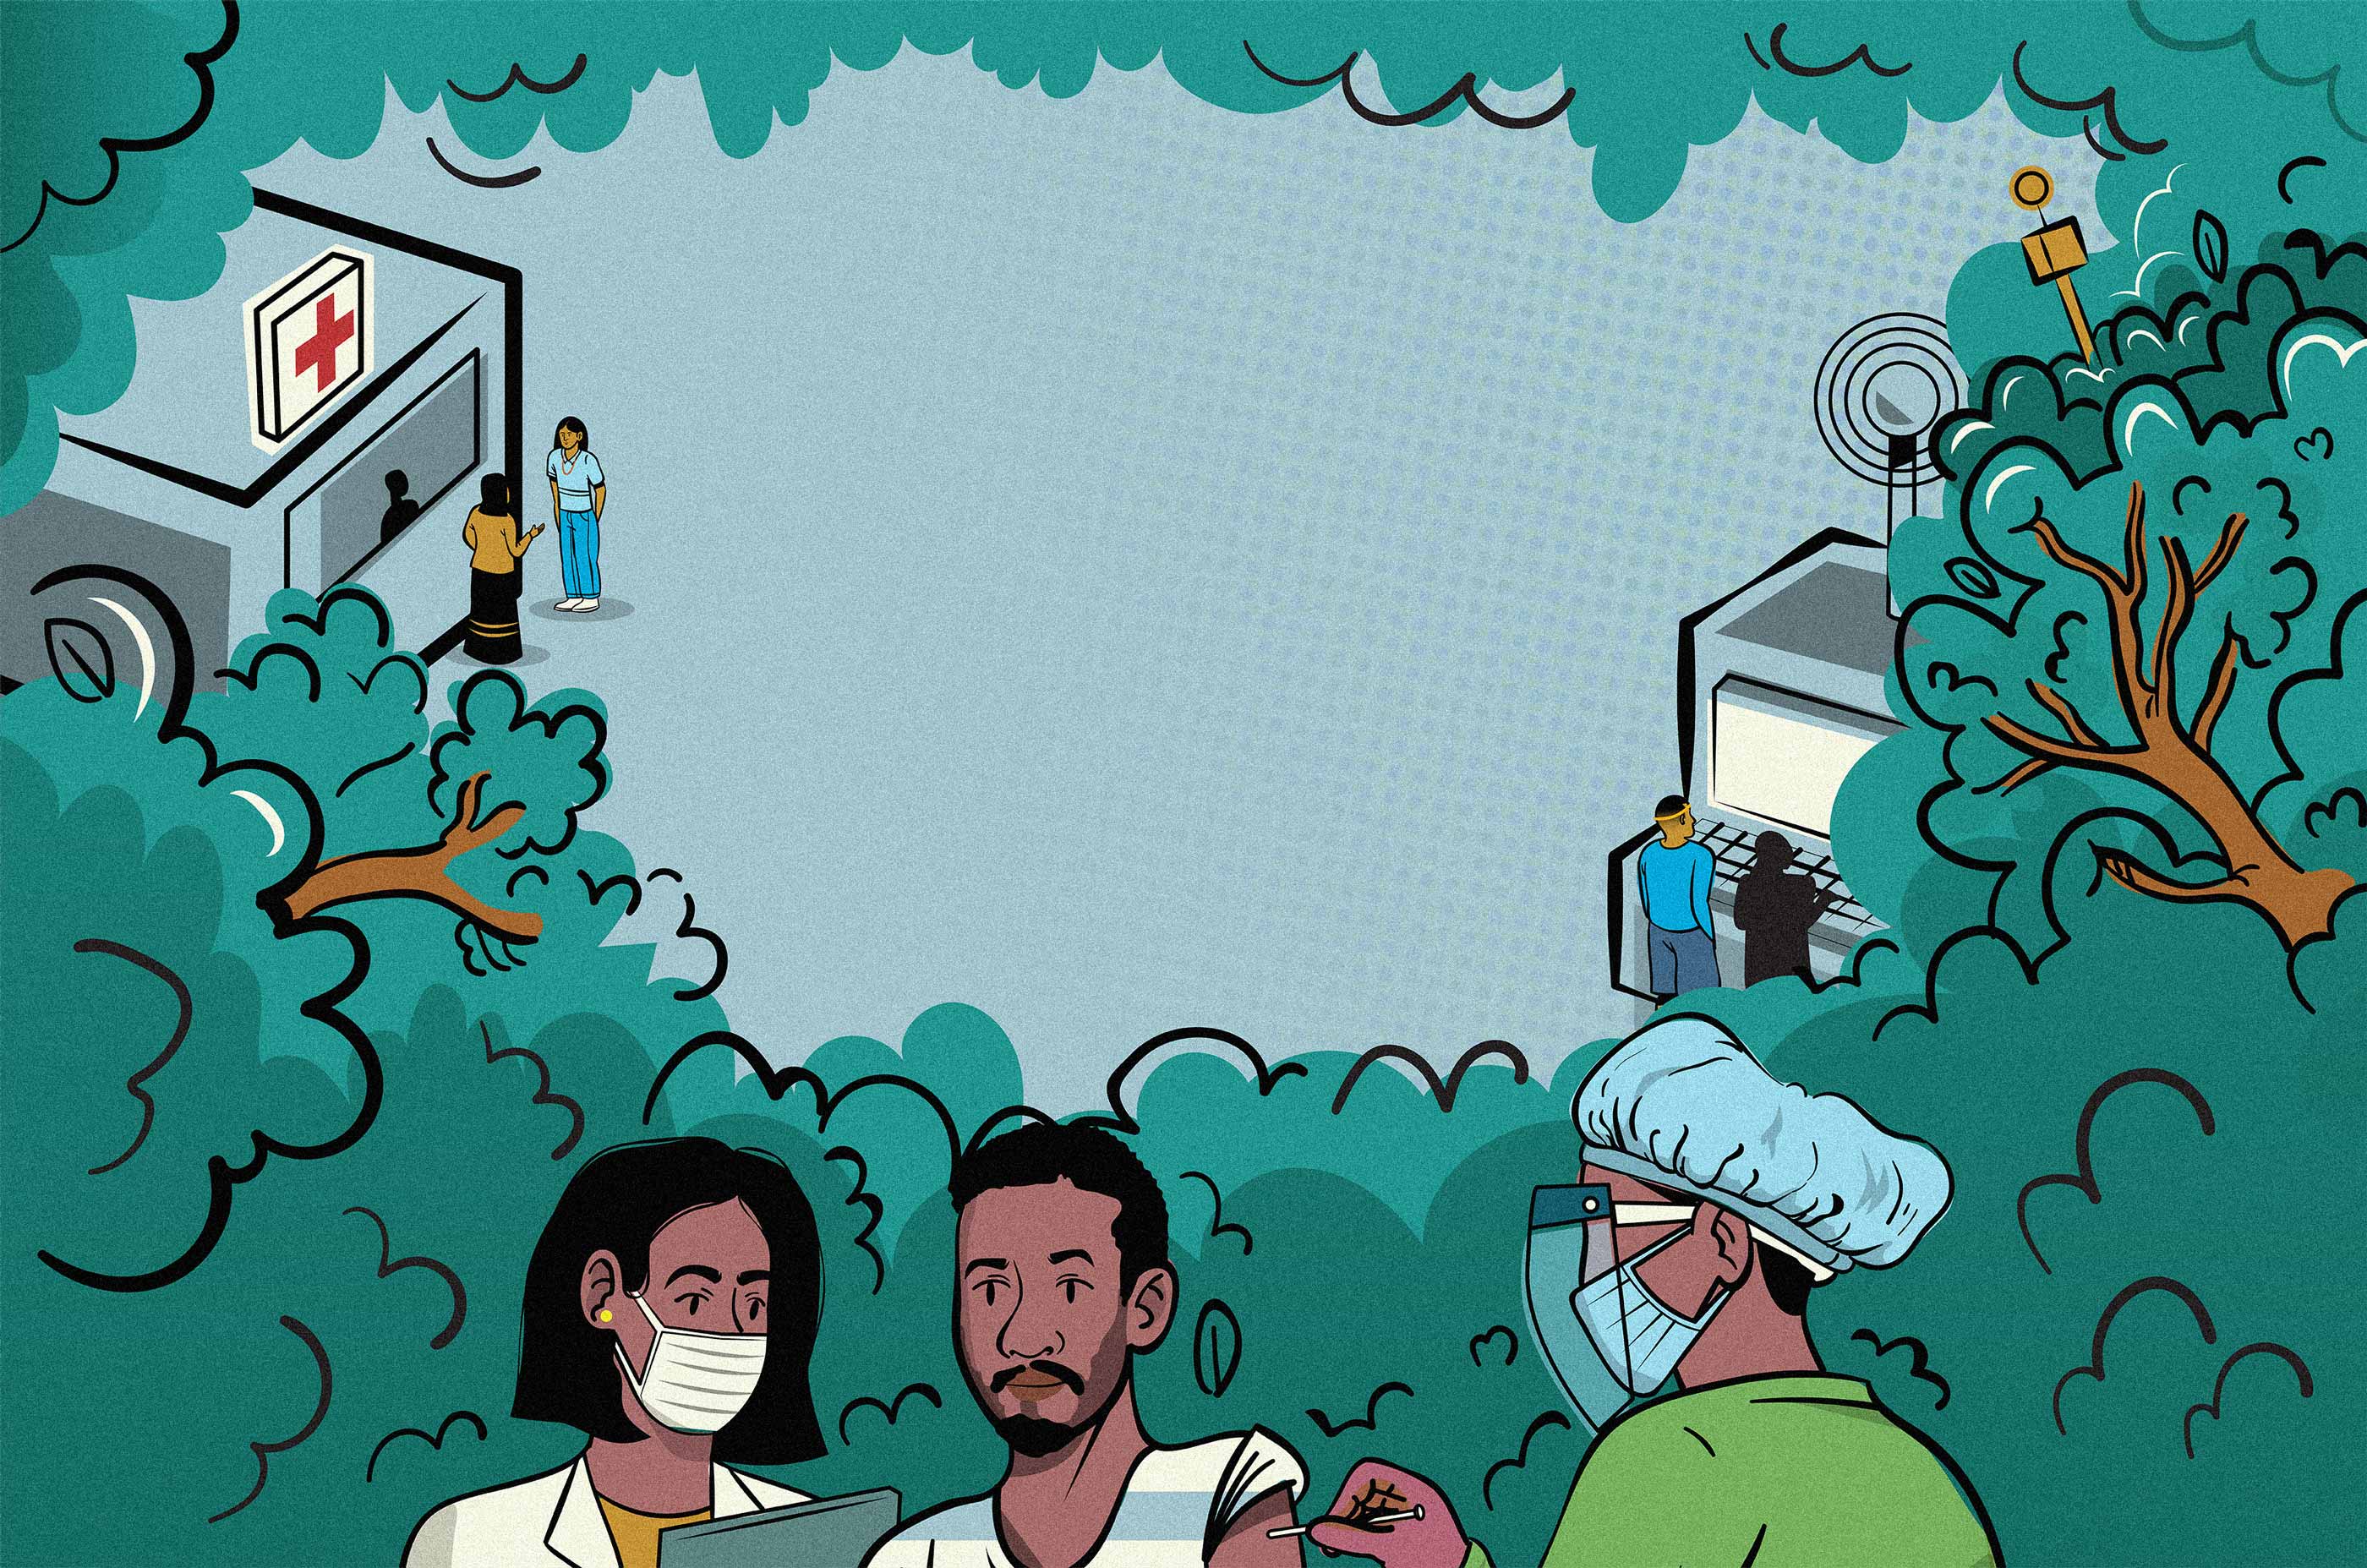 An illustration depicting trees and greenery surrounding scenes of hospital workers, people operating machines, and a person getting vaccinated. 